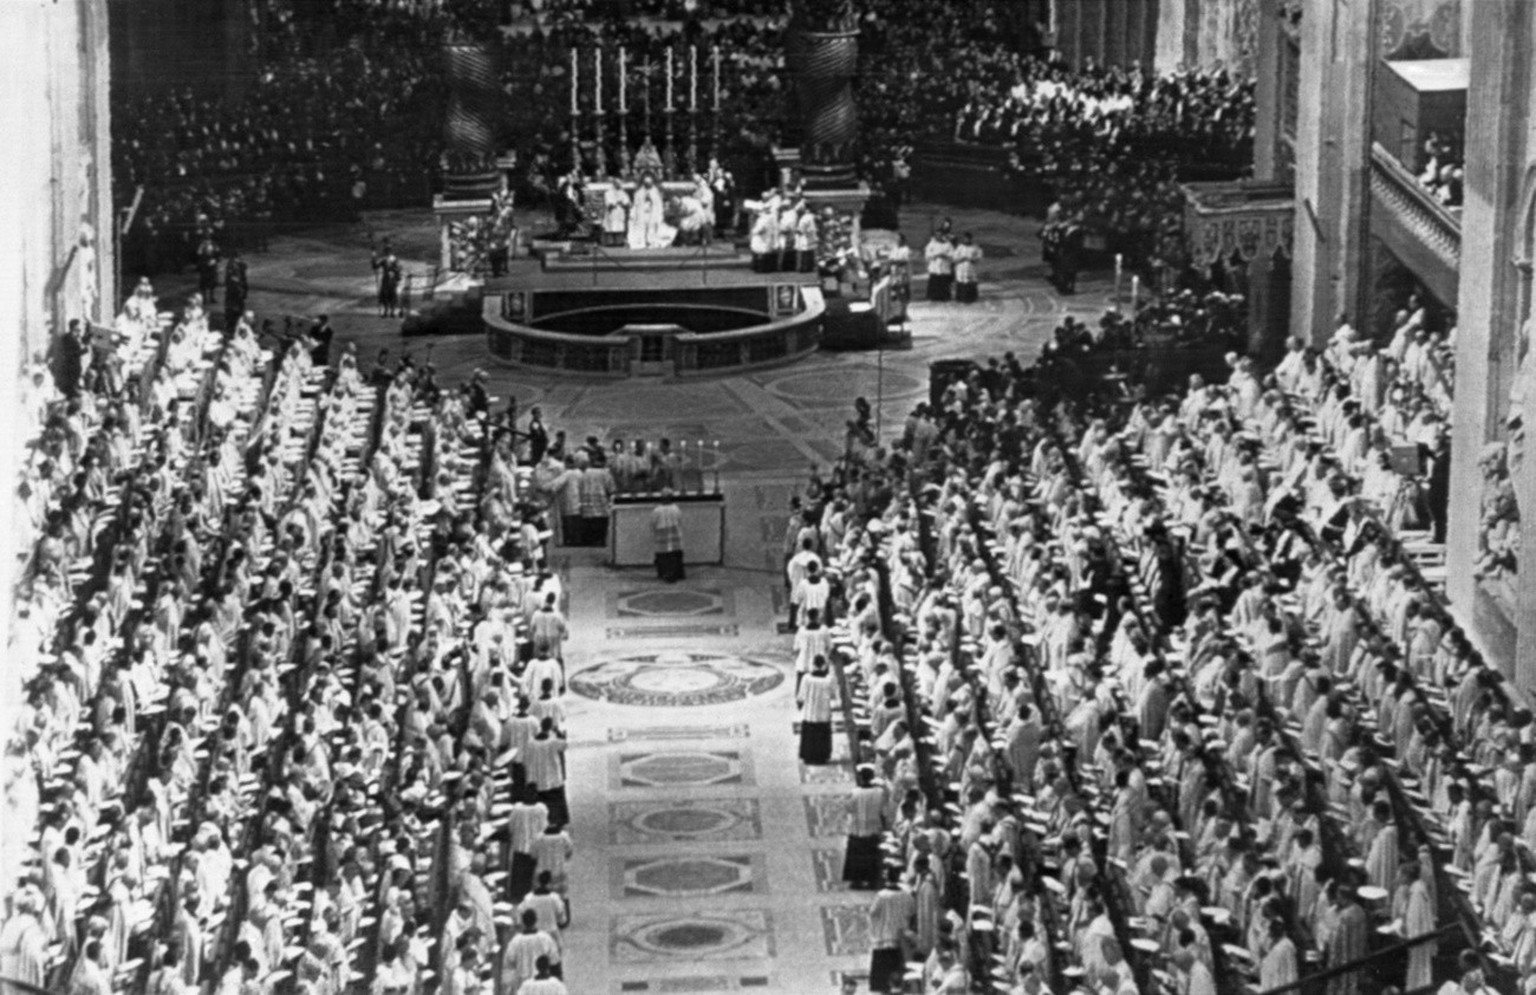 The second Vatican Ecumenical Council - Roman Catholicism&#039;s greatest assembly of prelates in history - was opened Oct. 11, 1962 by Pope John XXIII in St. Peter&#039;s Basilica in Vatican City. (A ...